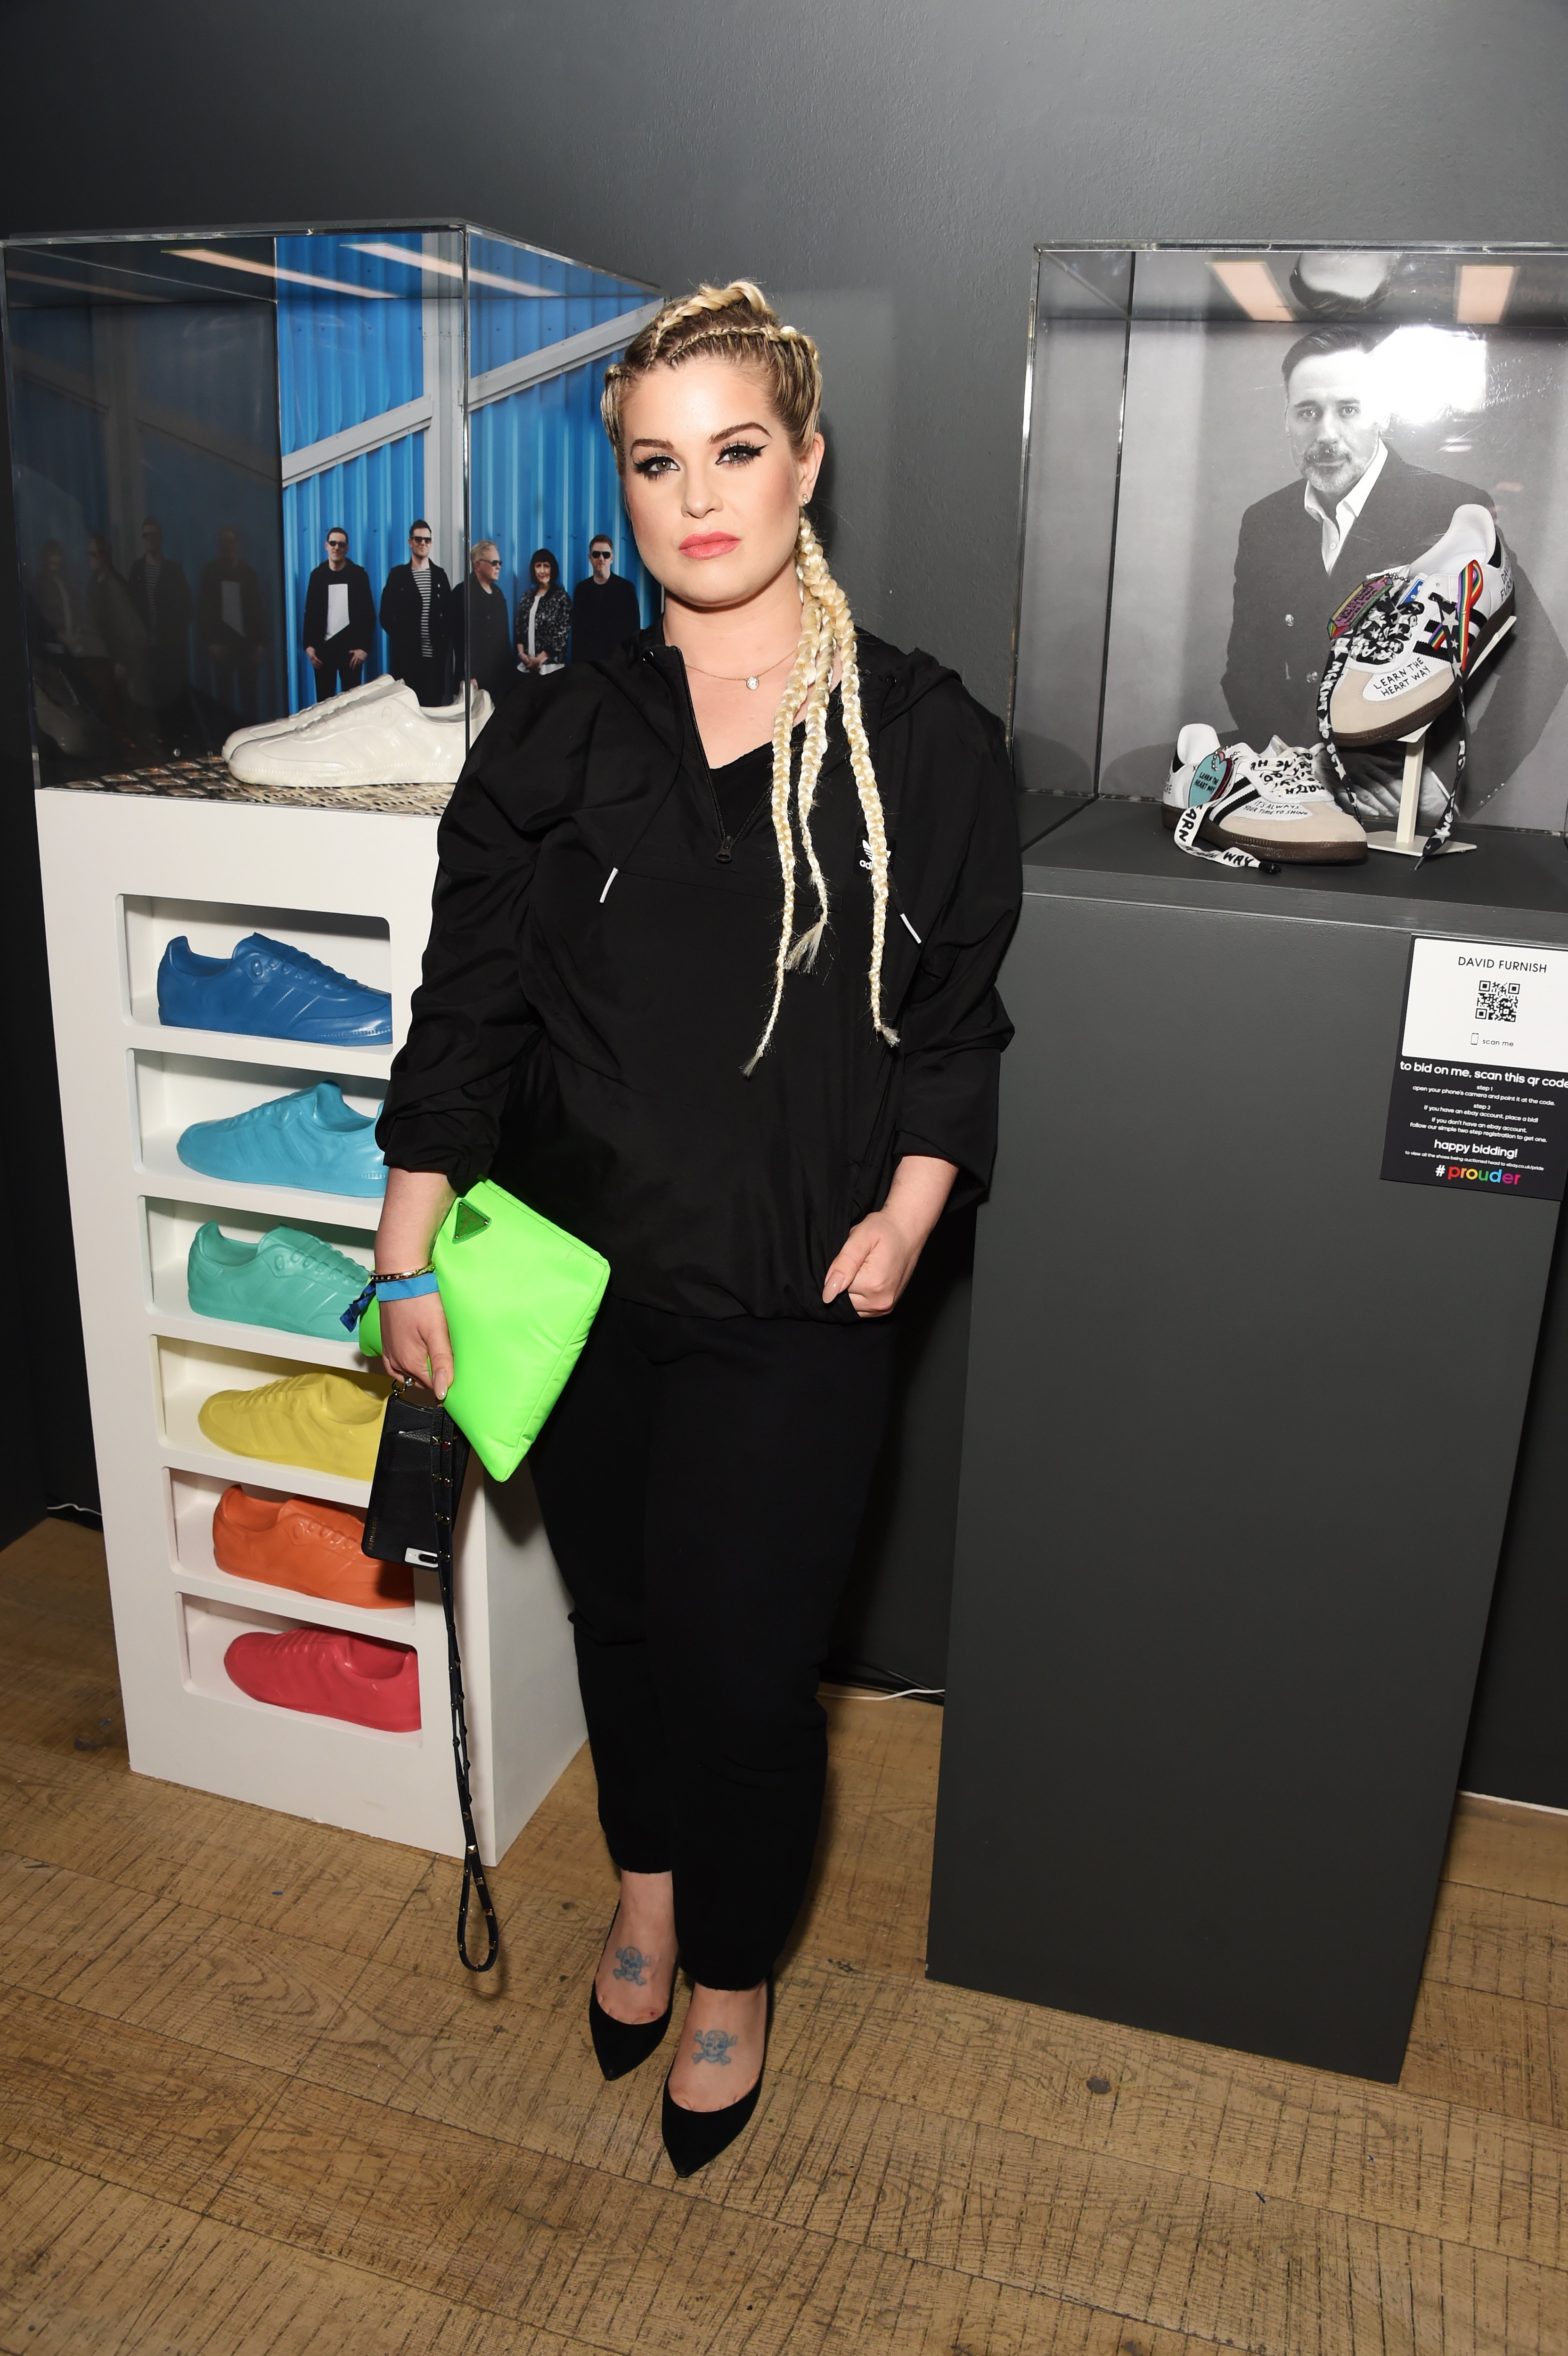 Kelly Osbourne attends Adidas' "Prouder': A Fat Tony Project" at Heni Gallery Soho on July 3, 2018 in London, England.┃Source: Getty Images